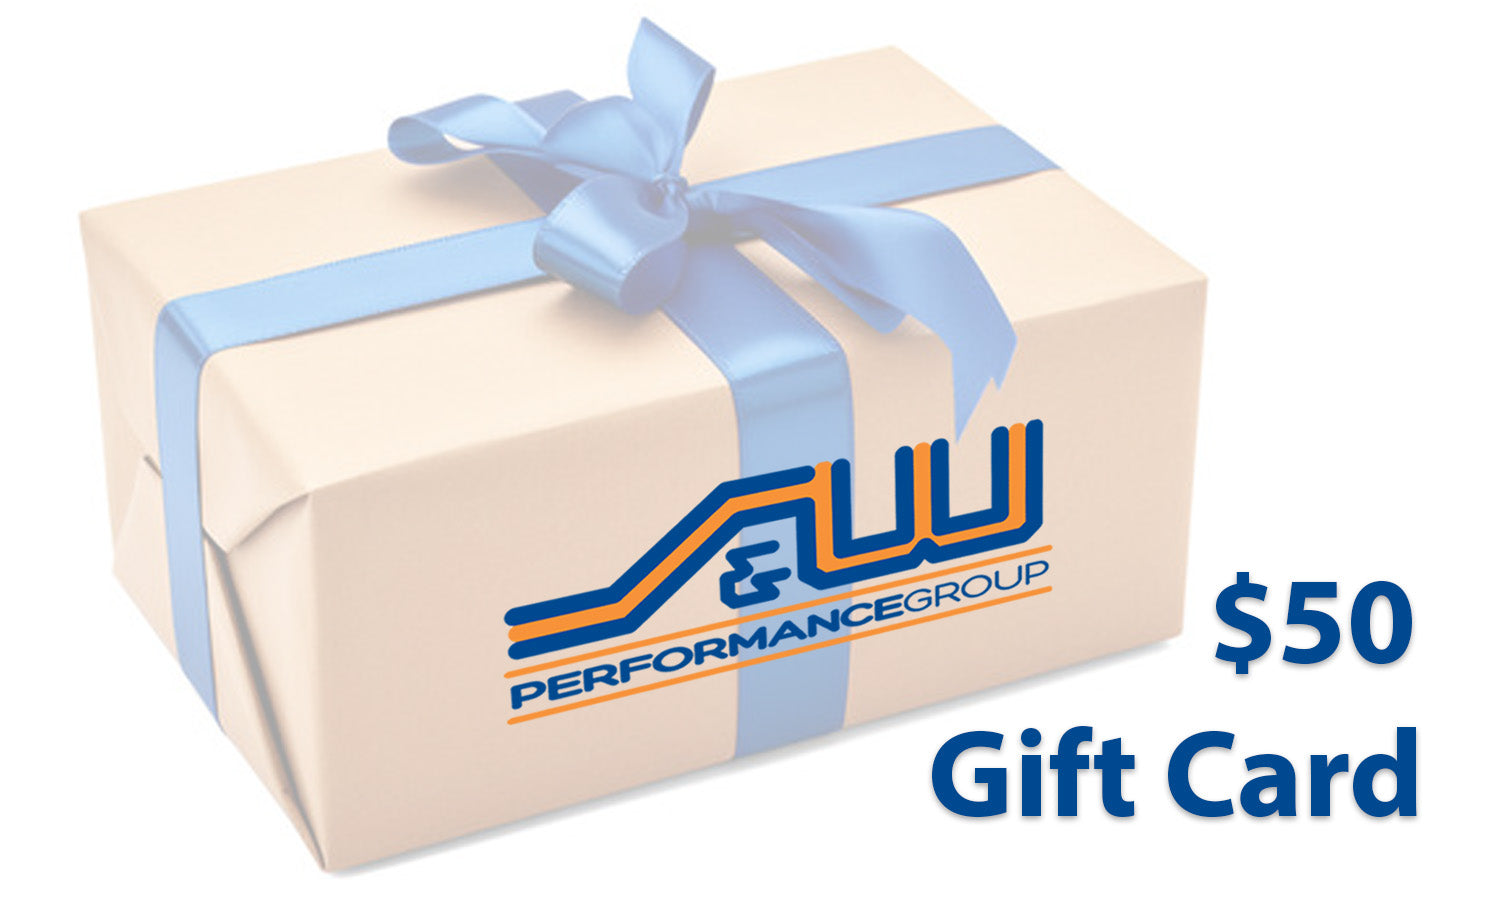 S&W Performance Group $50 Gift Card